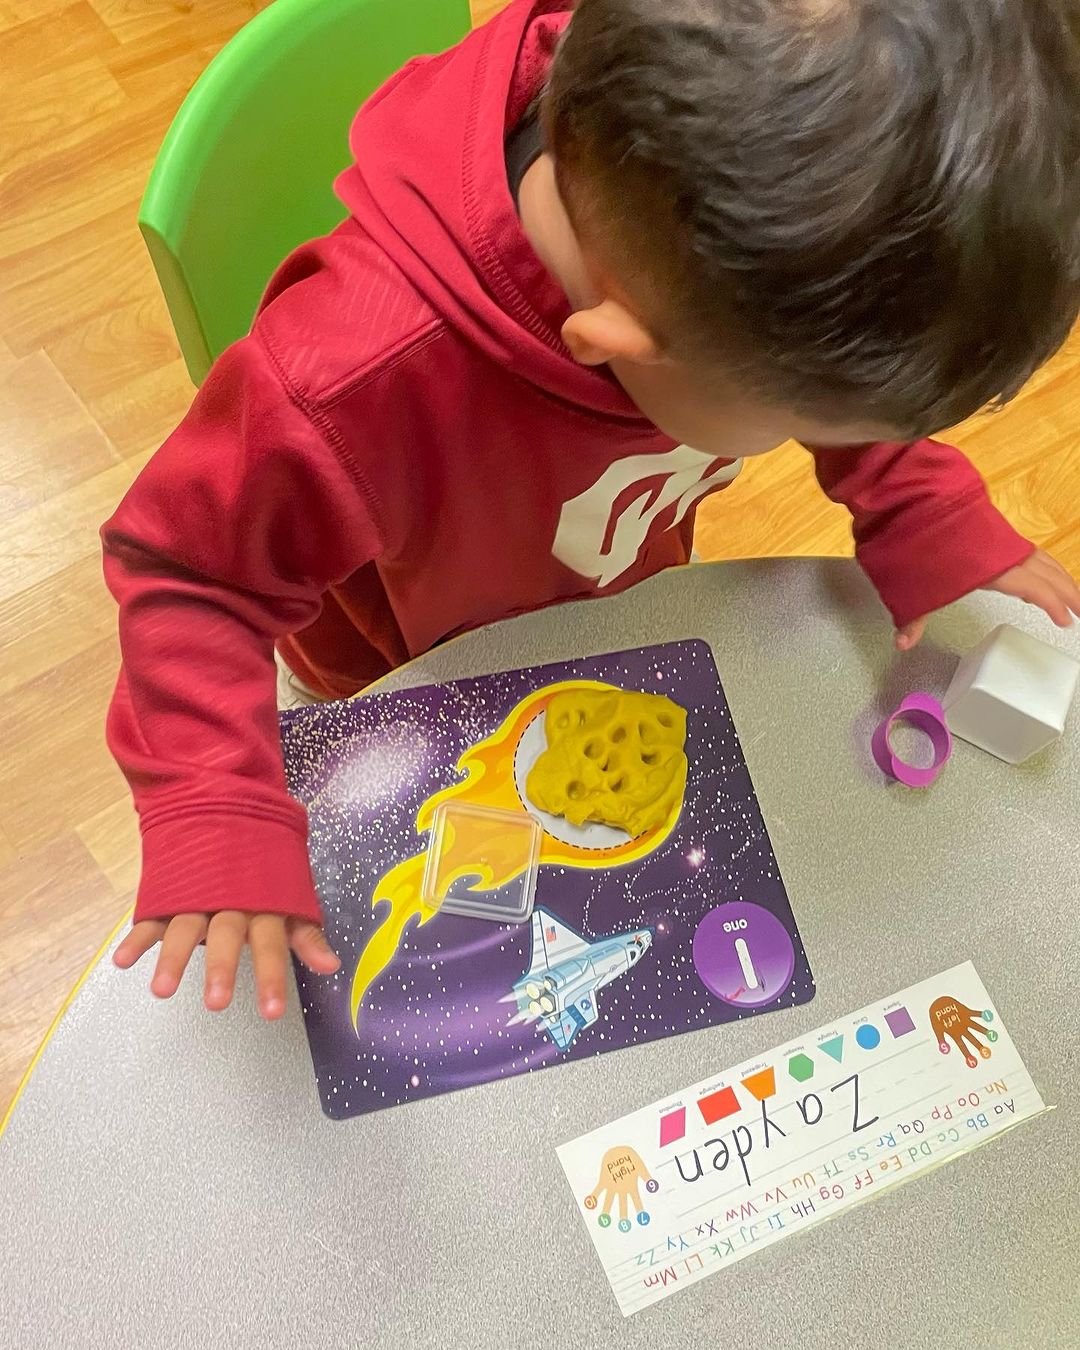 a young boy playing with a space themed activity